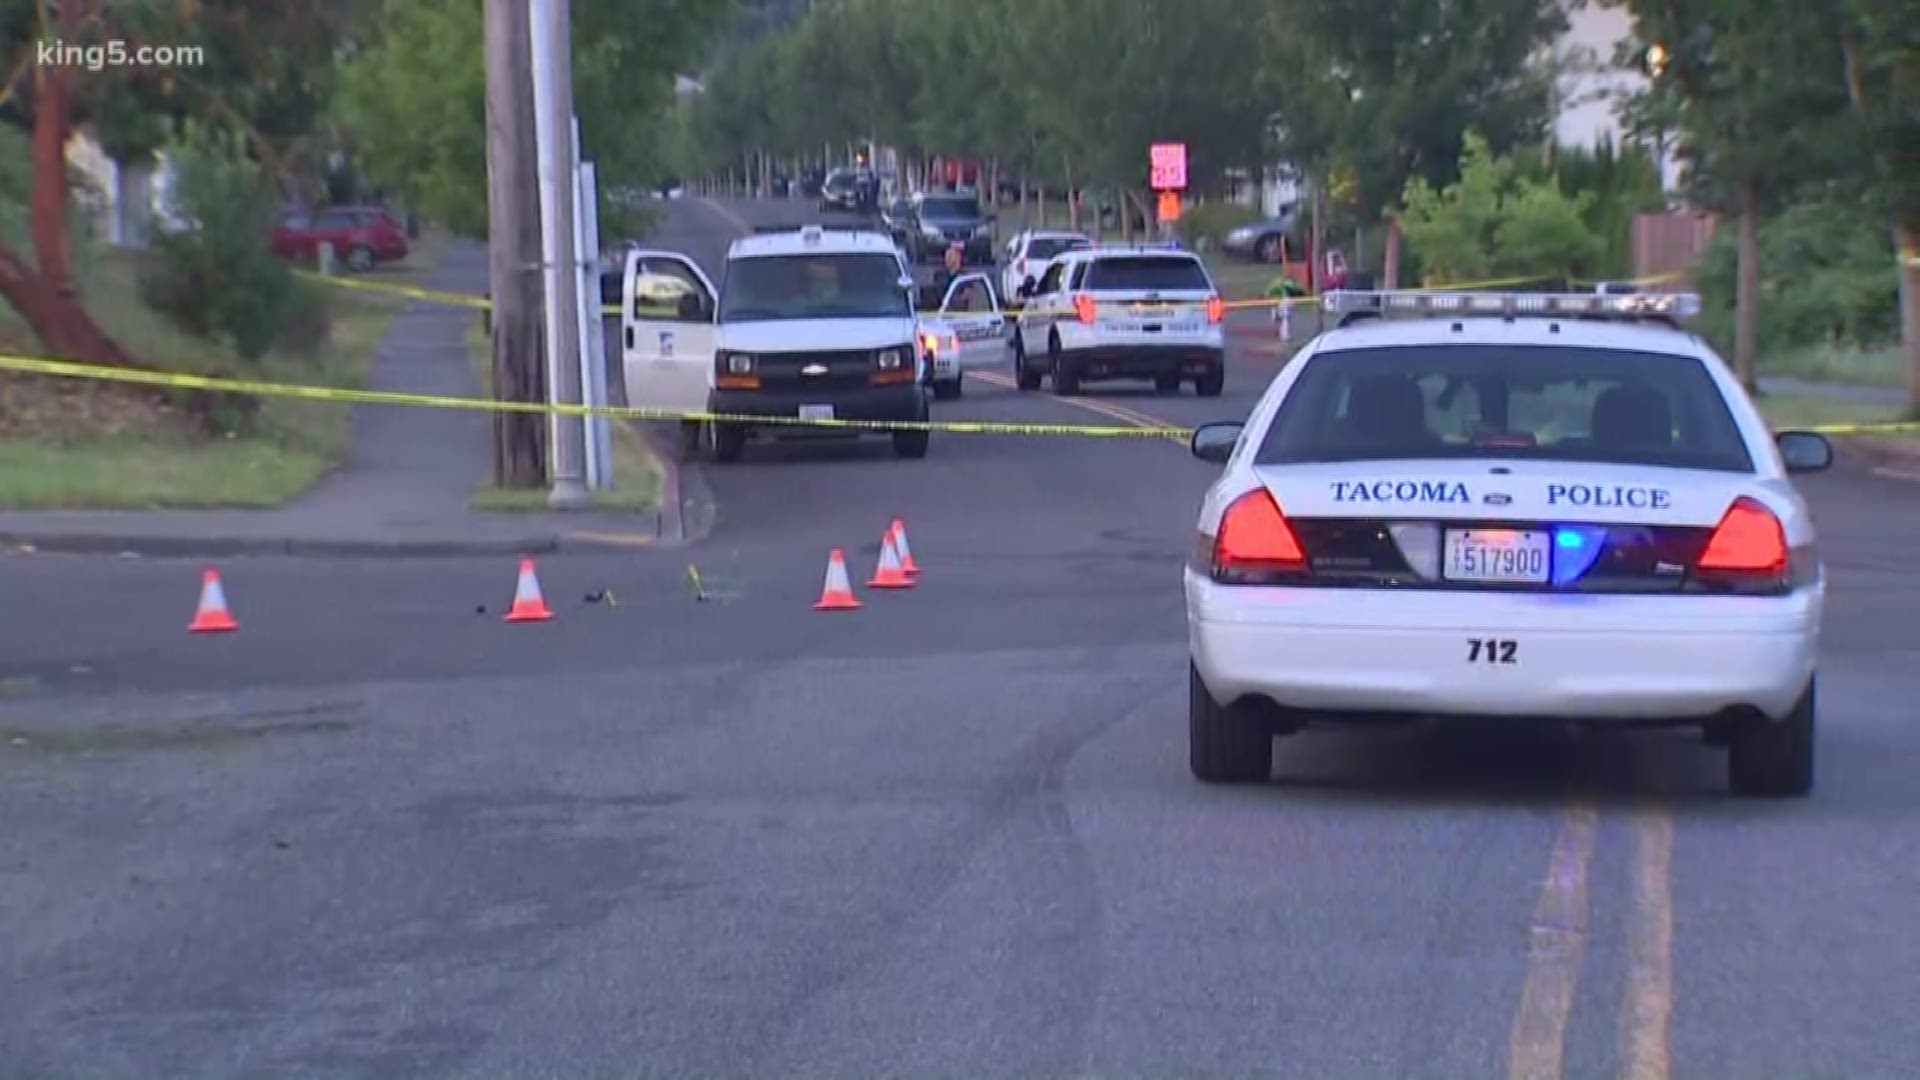 Two men died and three women were injured after Tacoma residents reported hearing several gunshots late Tuesday night.